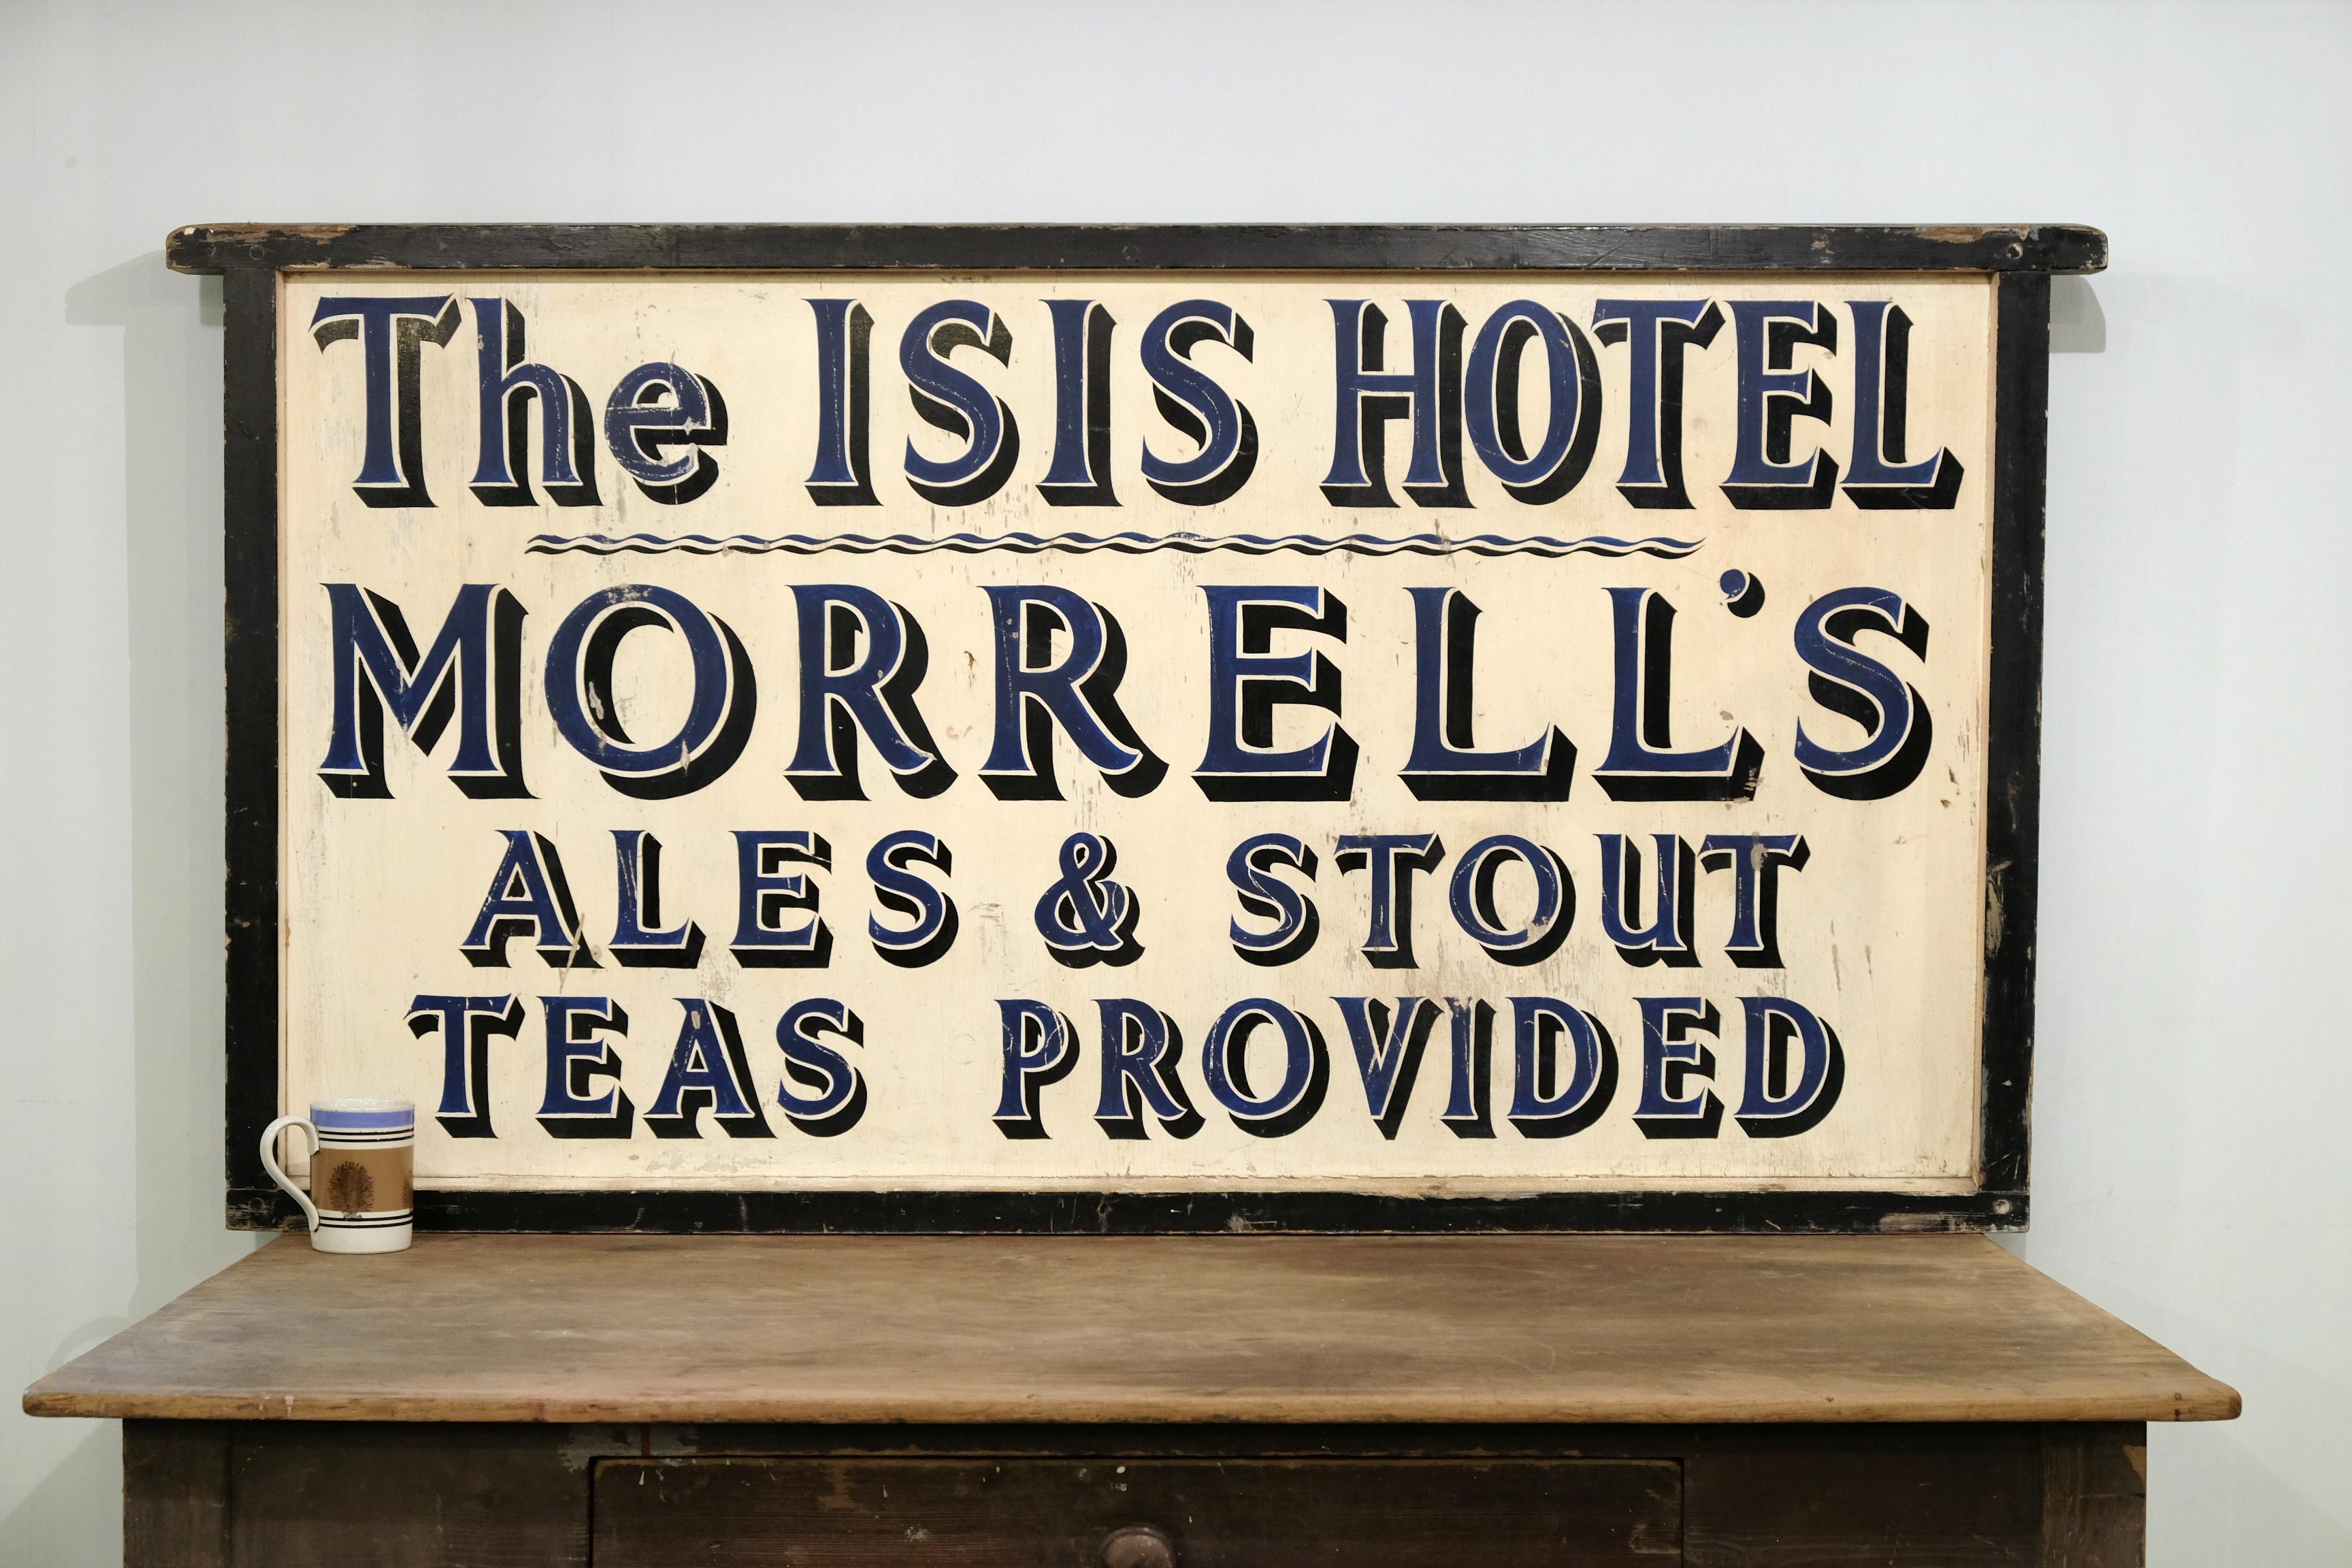 Large original hand painted sign for the interestingly named “Isis Hotel” - certainly a talking point! Sign written on thick timber with solid frame, circa 1940s.

The Isis Hotel still exists but is now called the Isis Farmhouse. It’s at Iffley